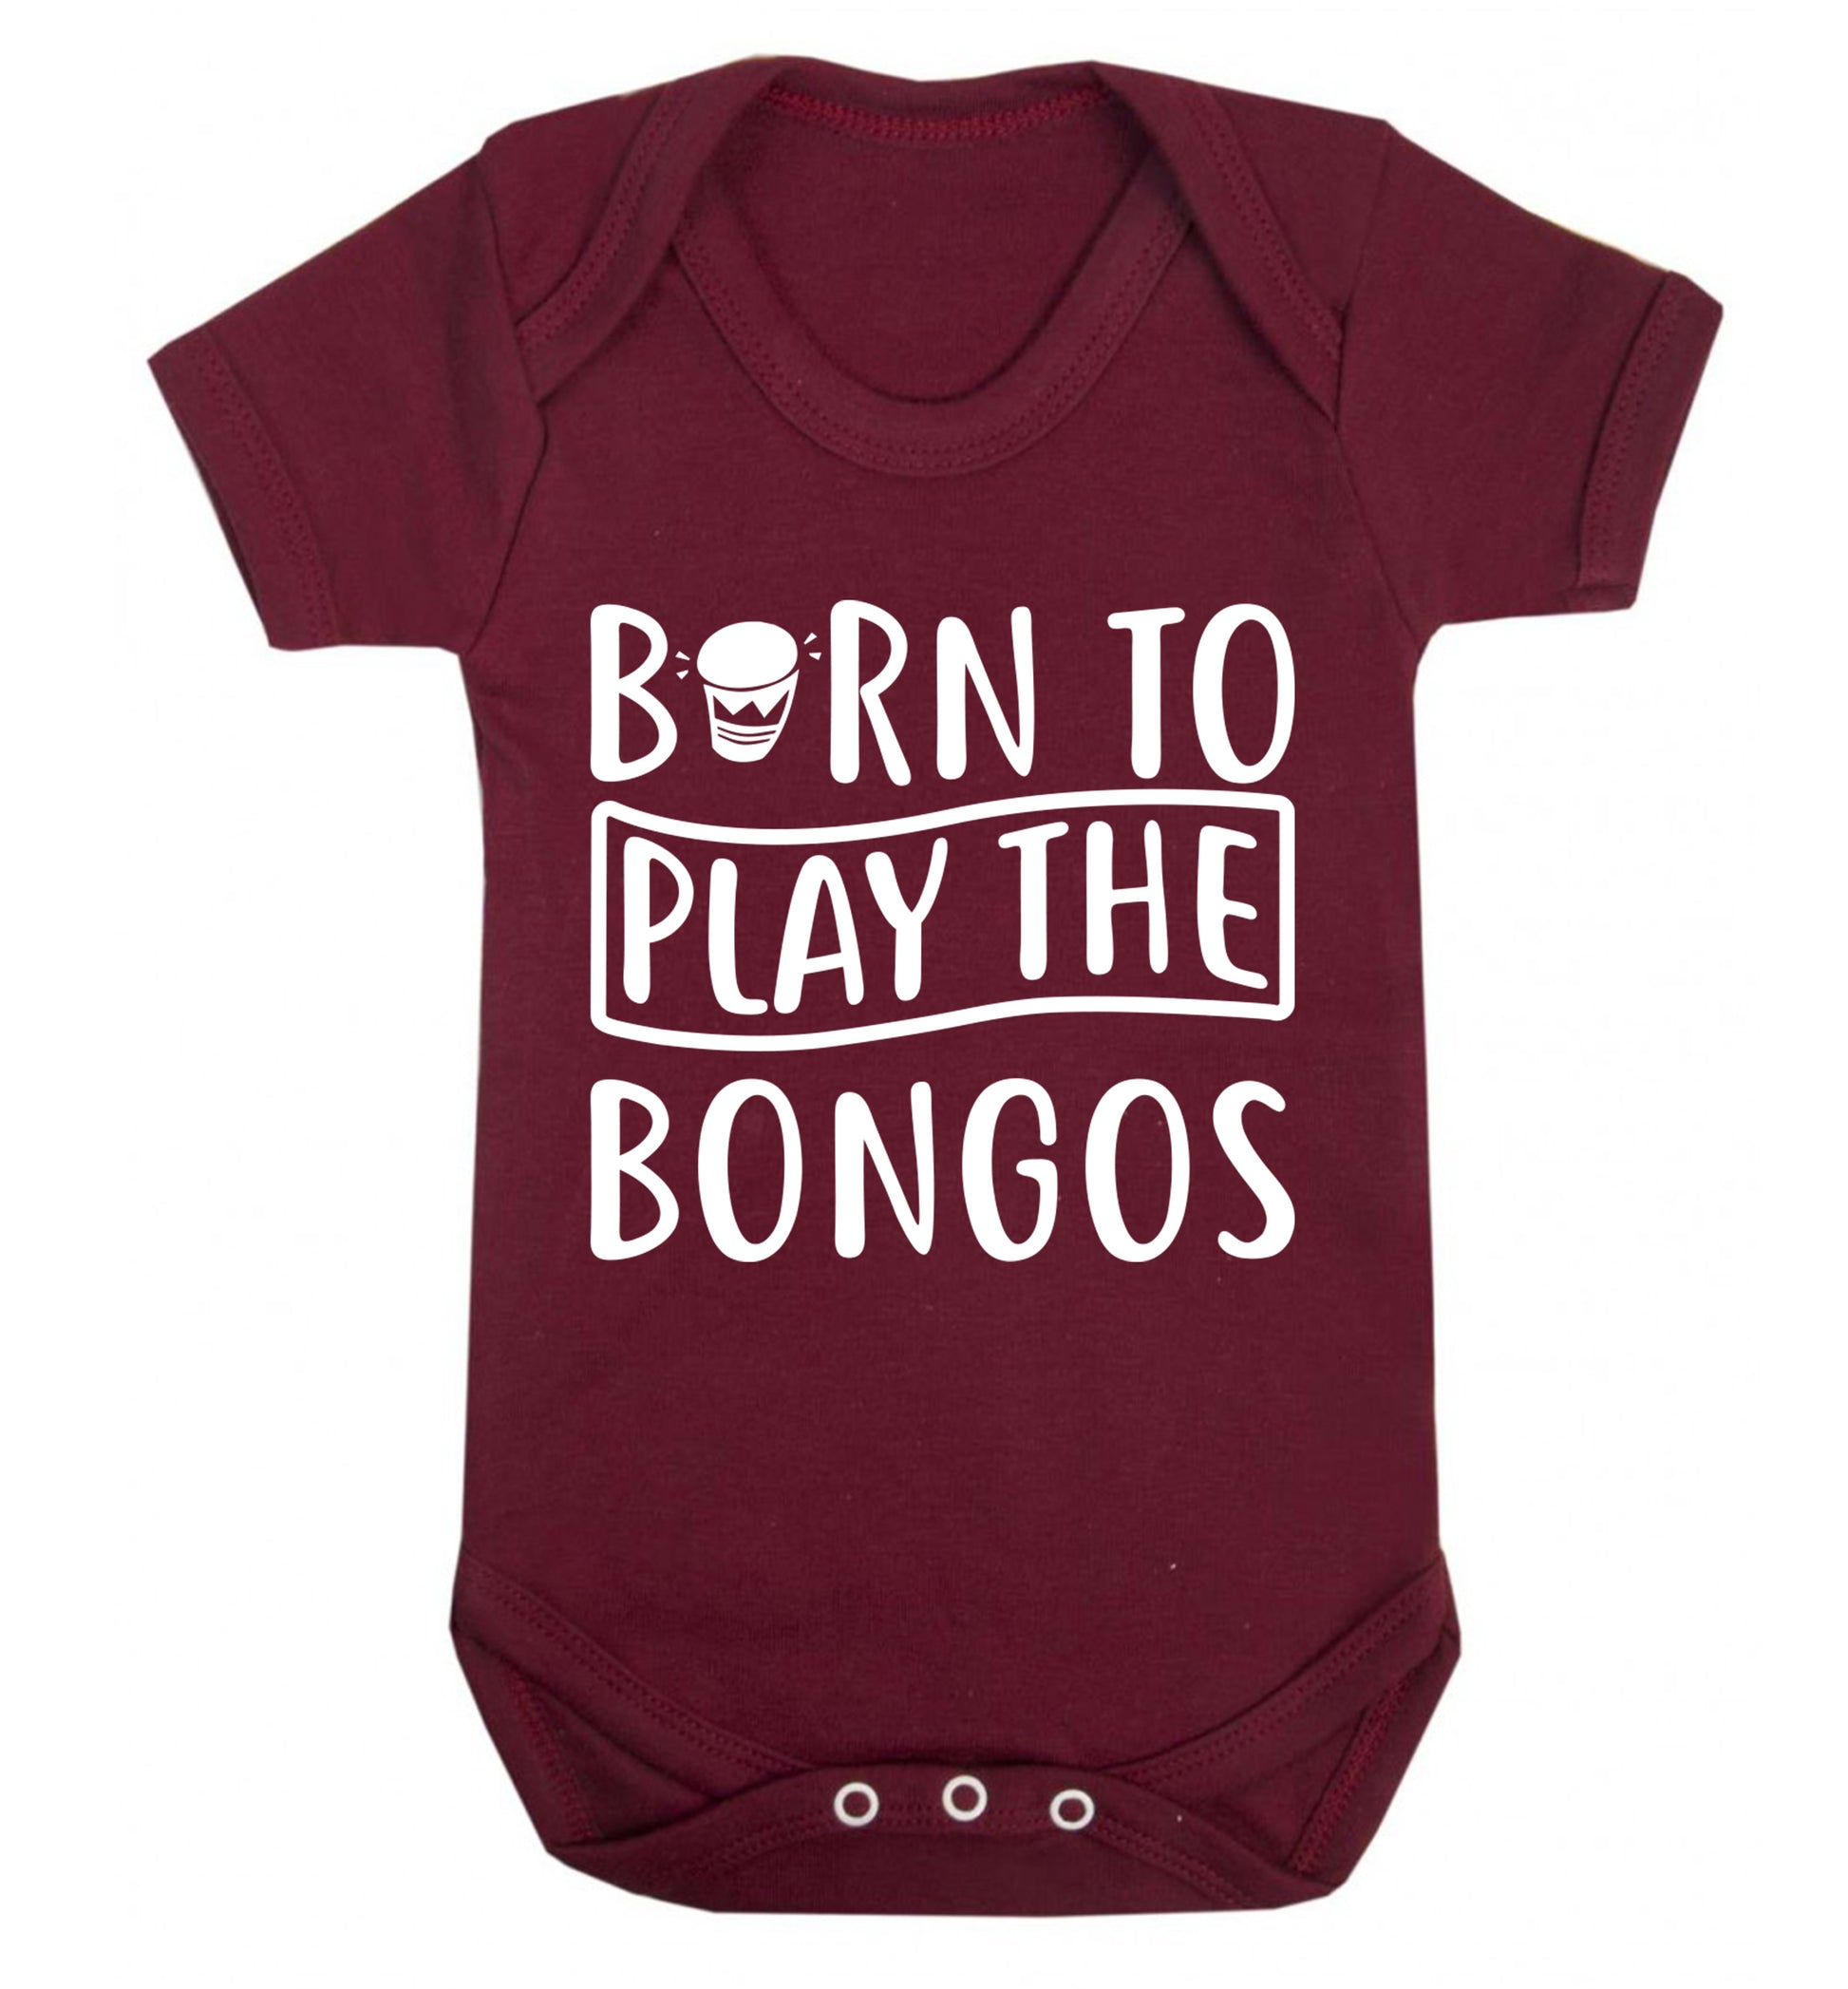 Born to play the bongos Baby Vest maroon 18-24 months